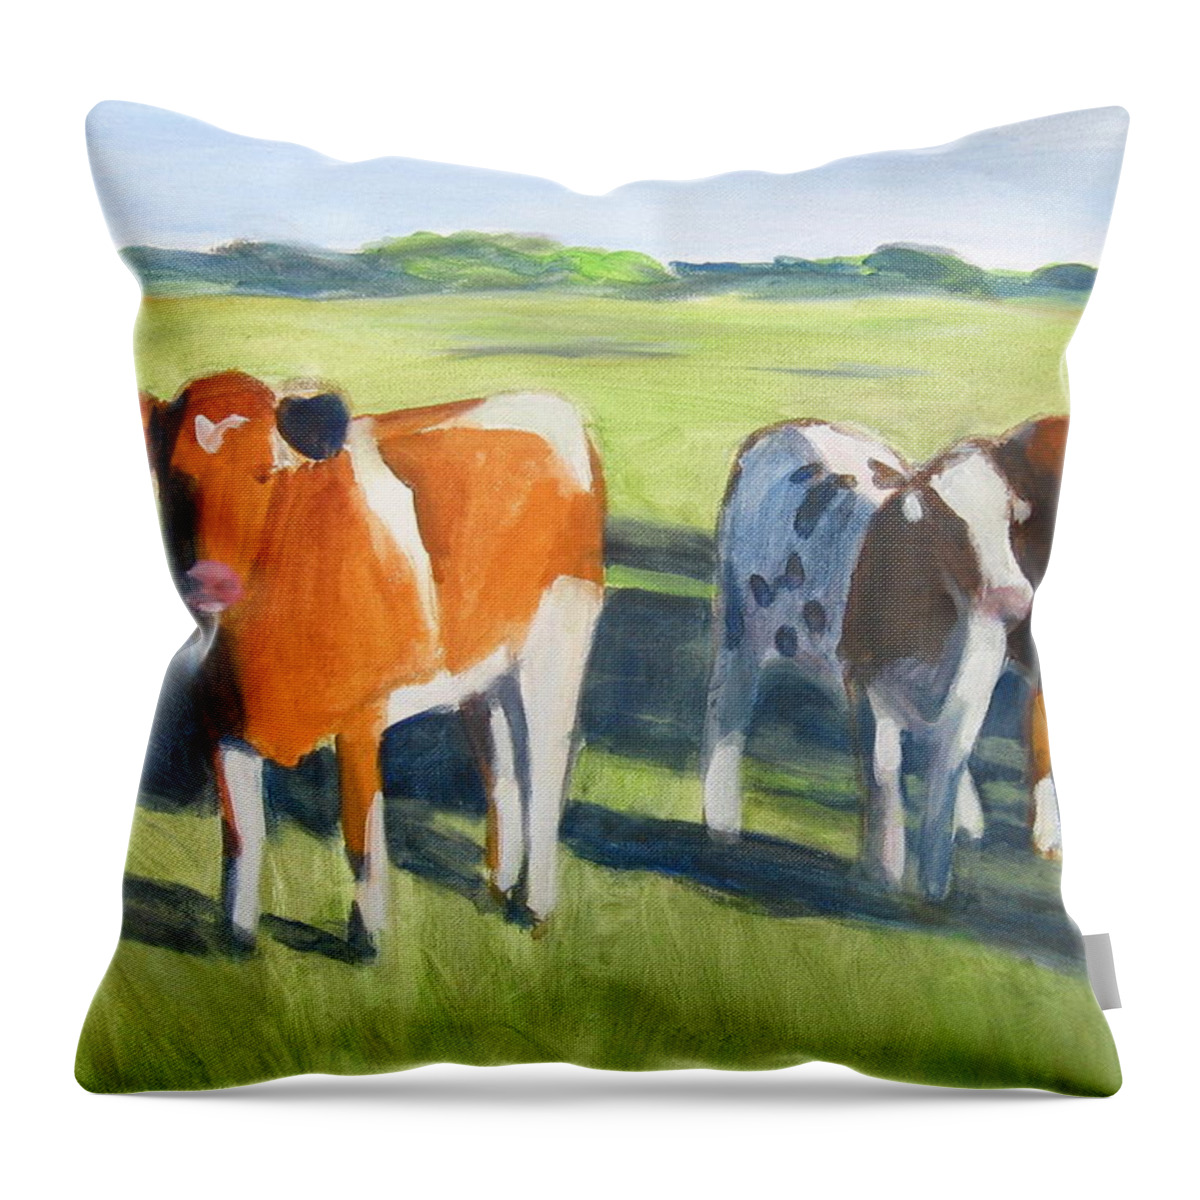 Cow Throw Pillow featuring the painting Happy Cows by Kazumi Whitemoon